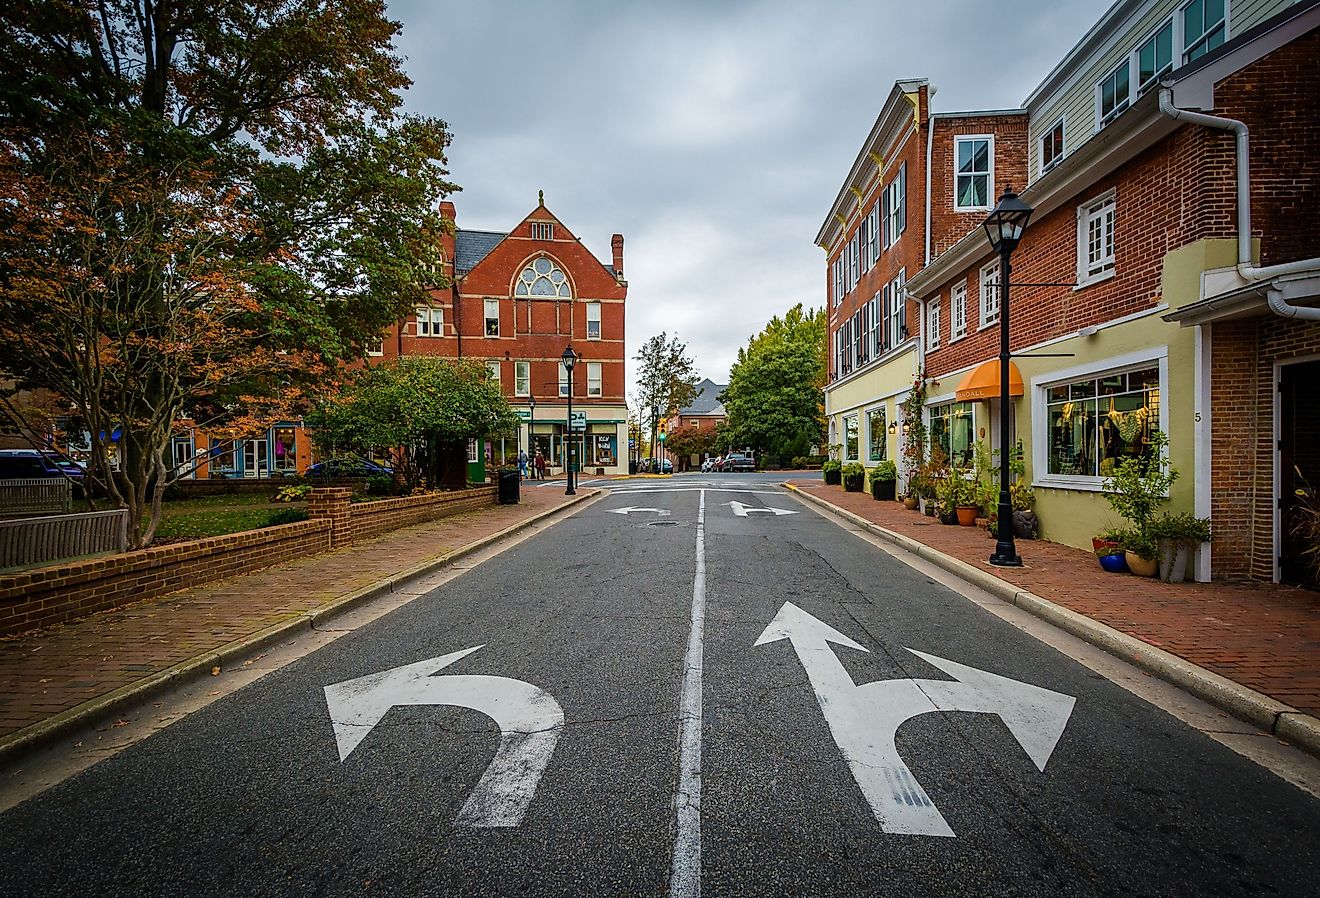 The intersection of Dover and Washington Streets, in Easton, Maryland.